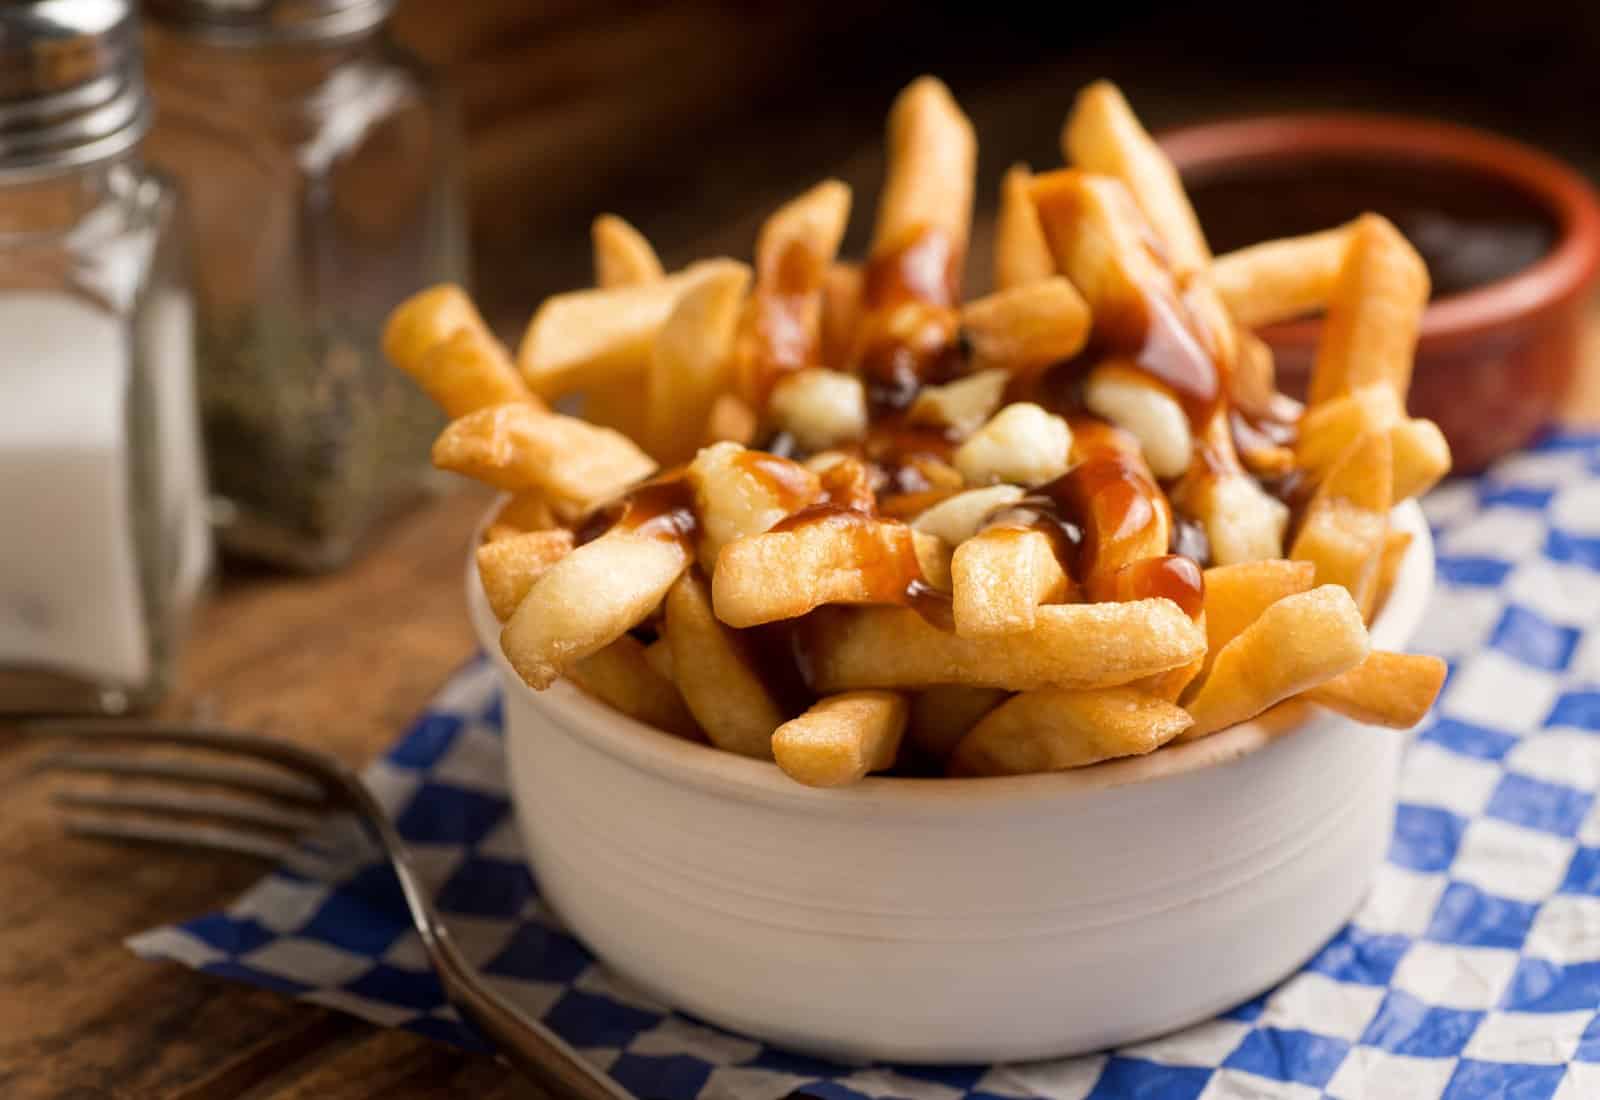 Image Credit: Shutterstock / Foodio <p><span>French fries, cheese curds, and gravy – a simple dish that’s become synonymous with Canadian comfort food. Perfect for those chilly northern nights.</span></p>